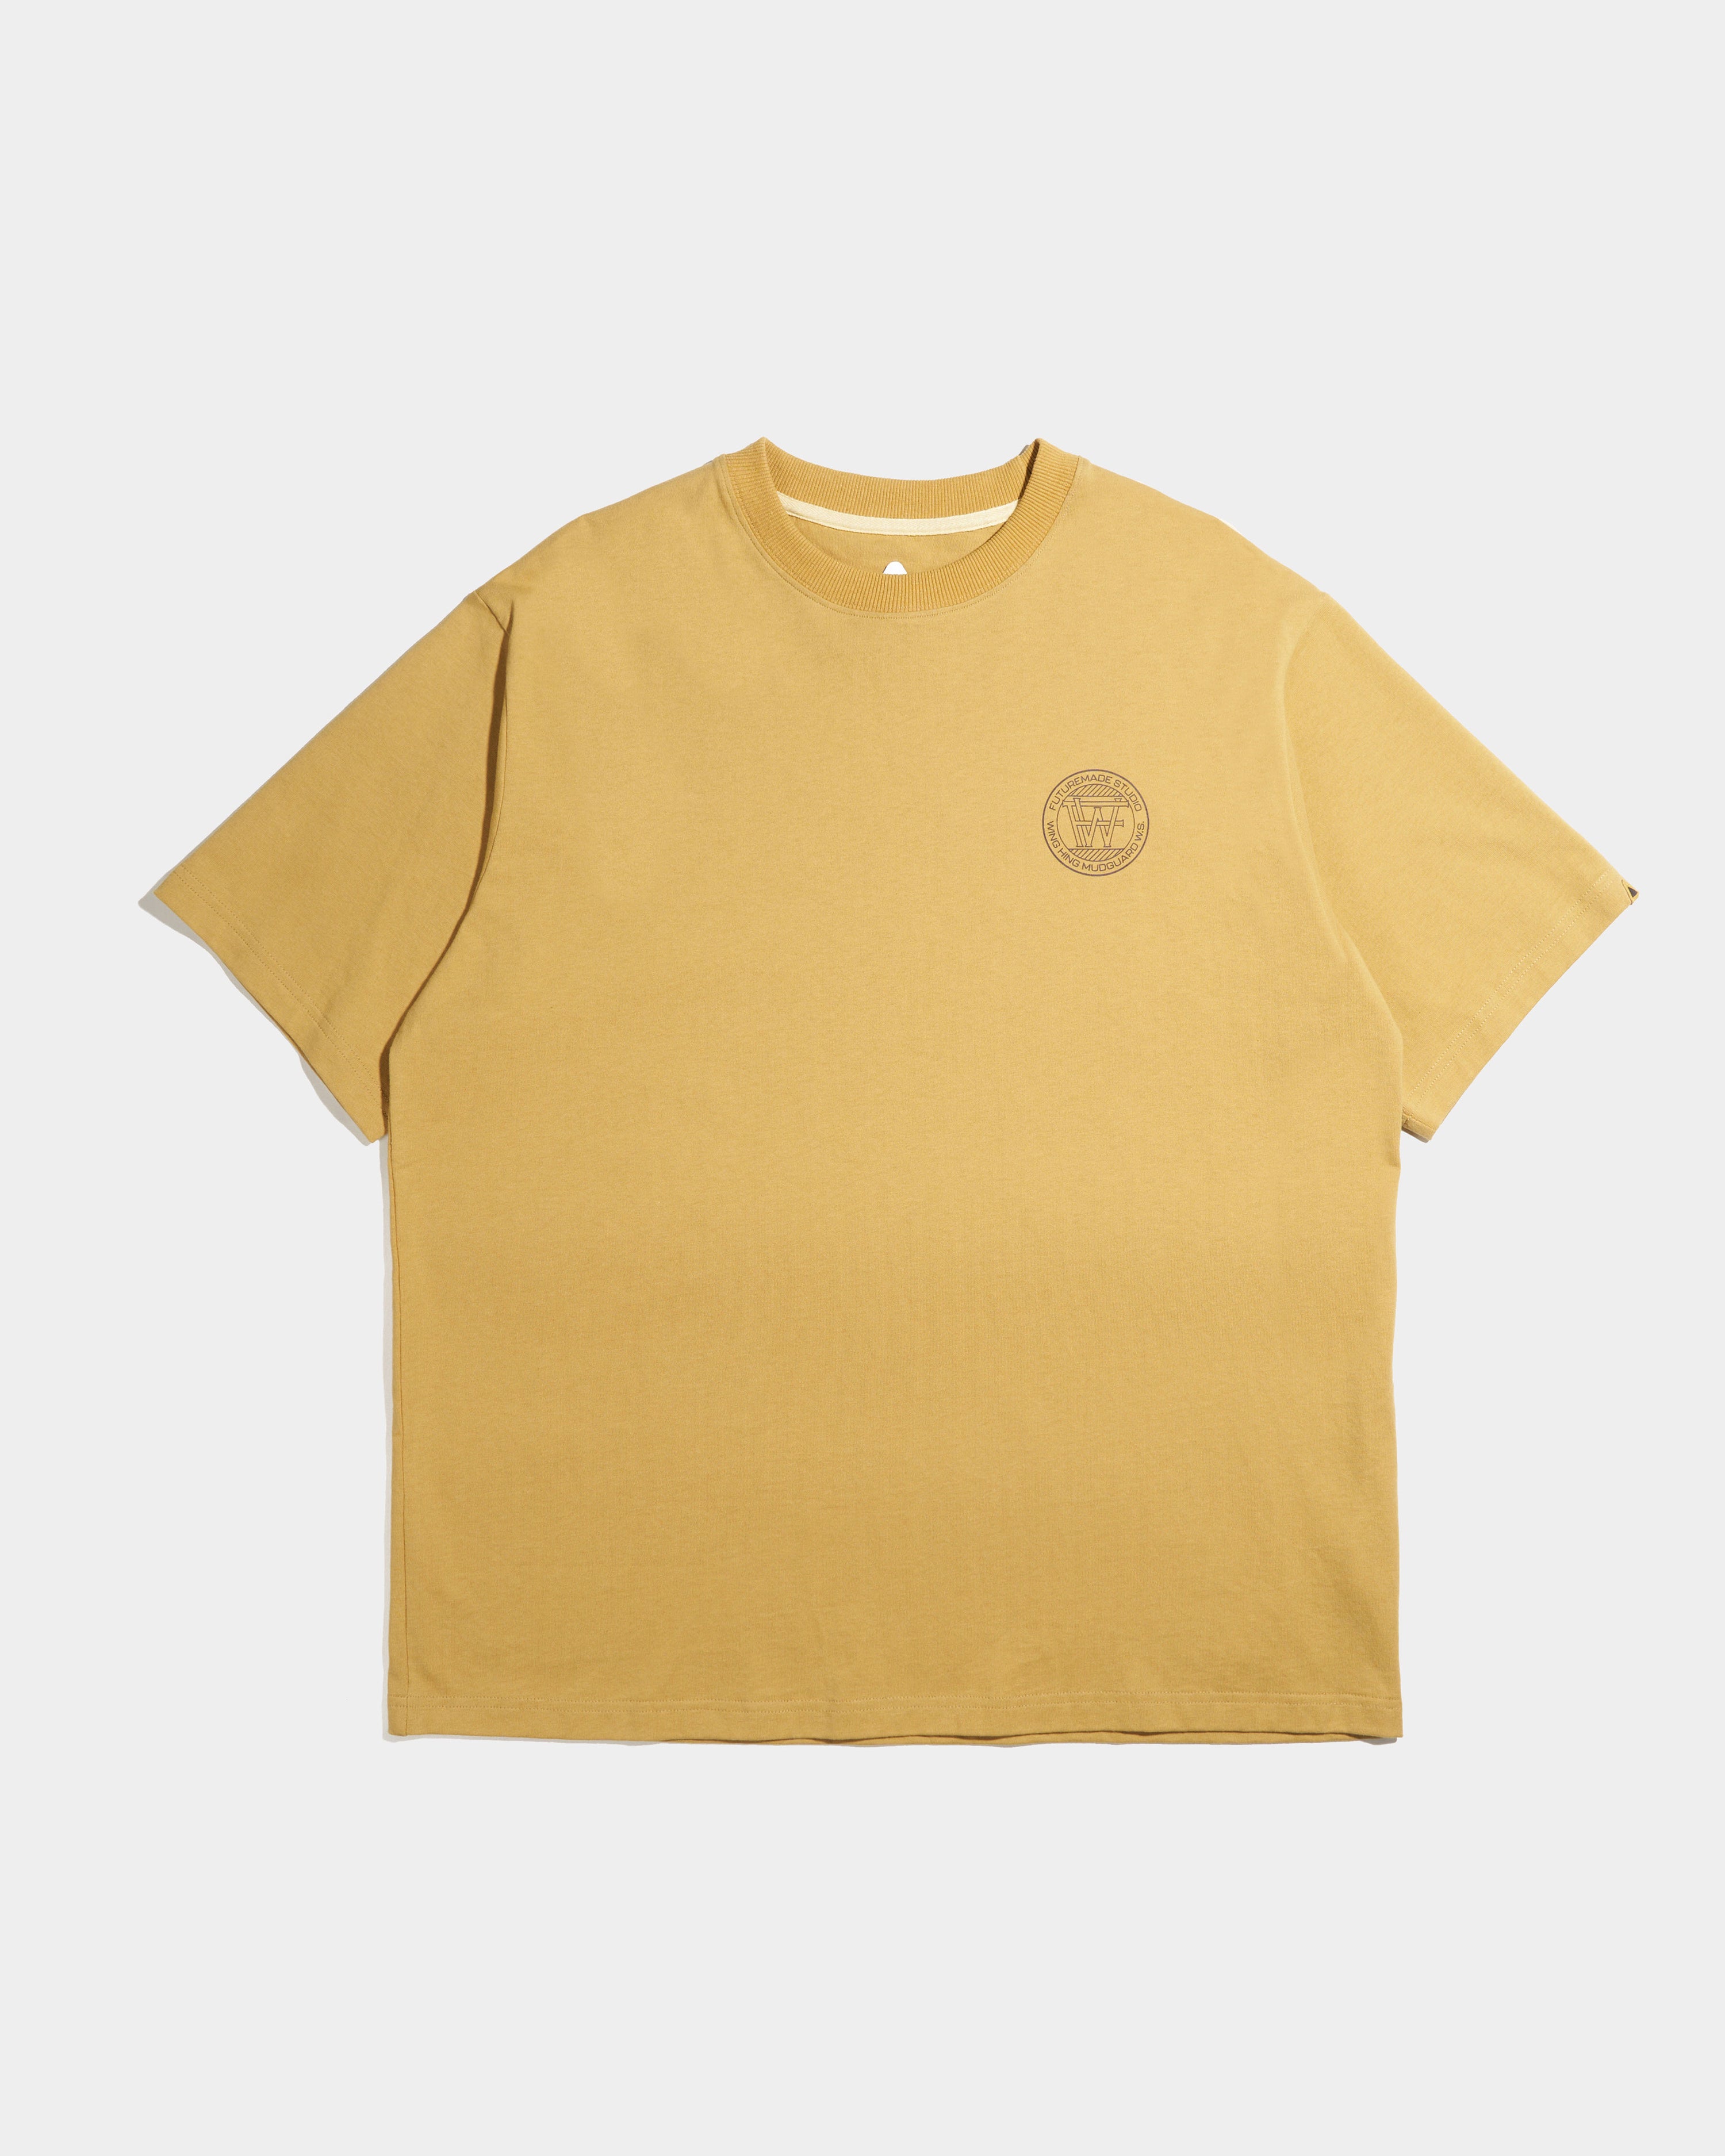 WH DELICA BADGE TEE